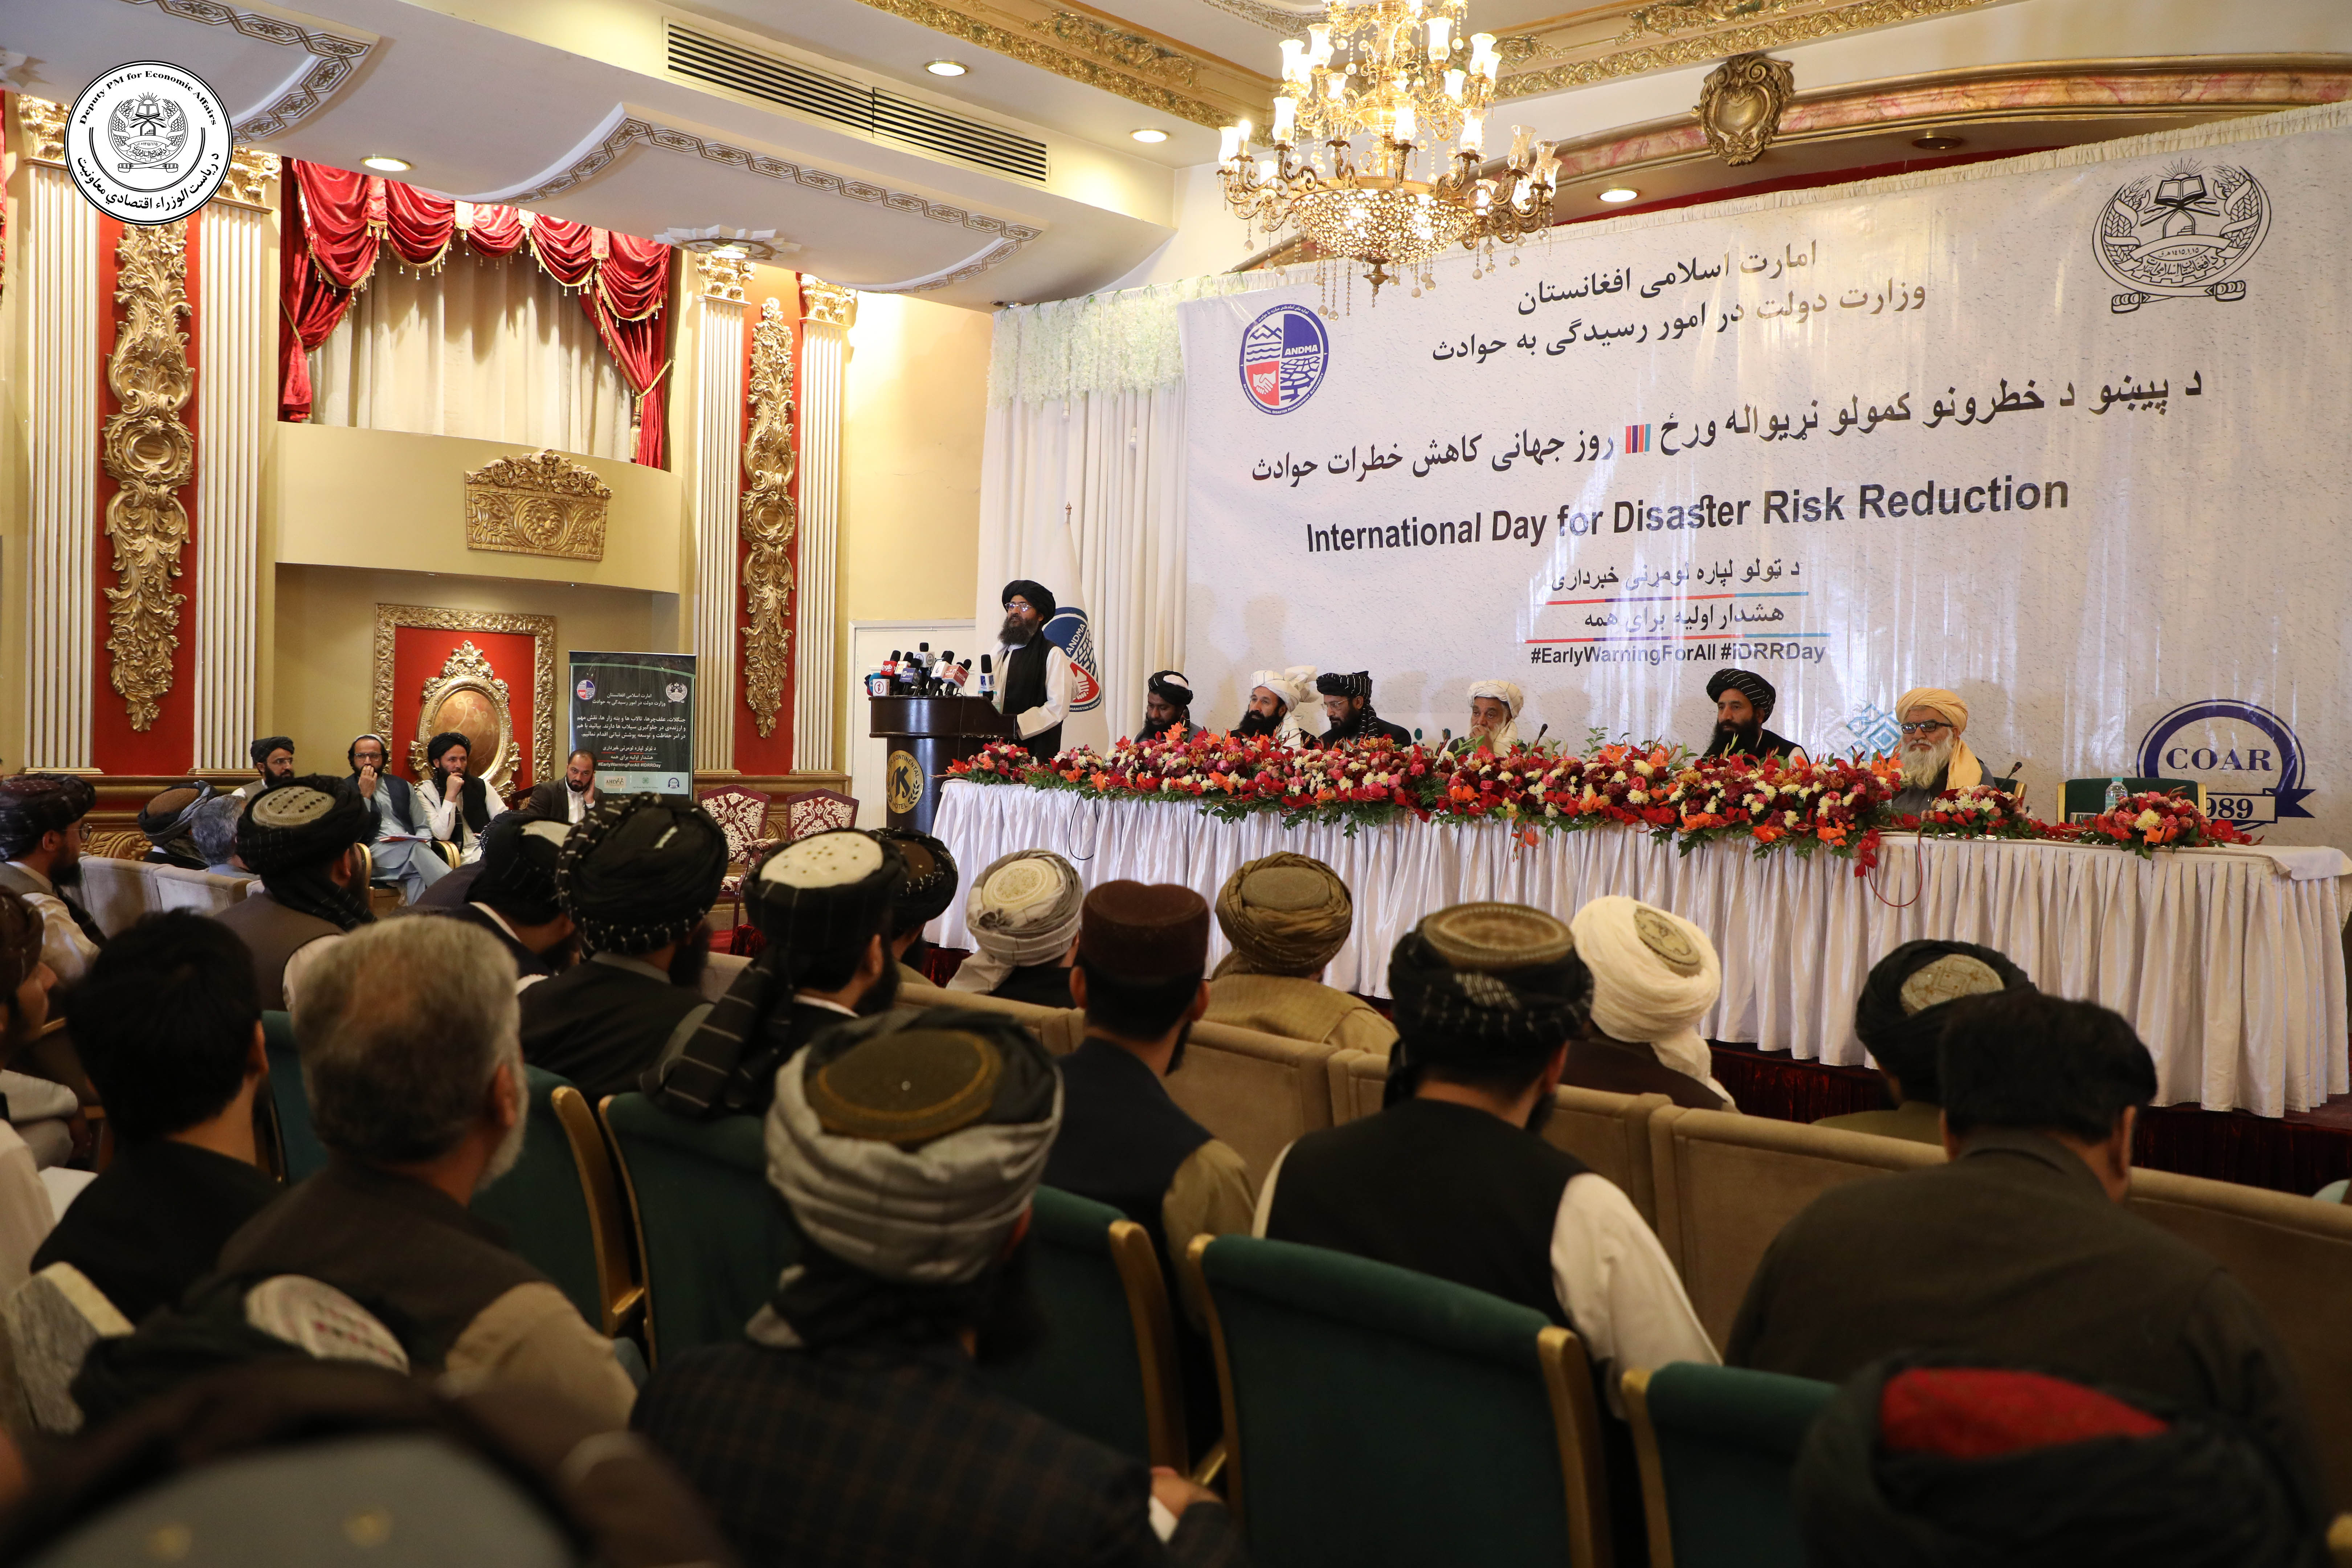 Hajji Mullah Abdul Ghani Baradar Akhund, participated in the International Day for Disaster Risk Reduction